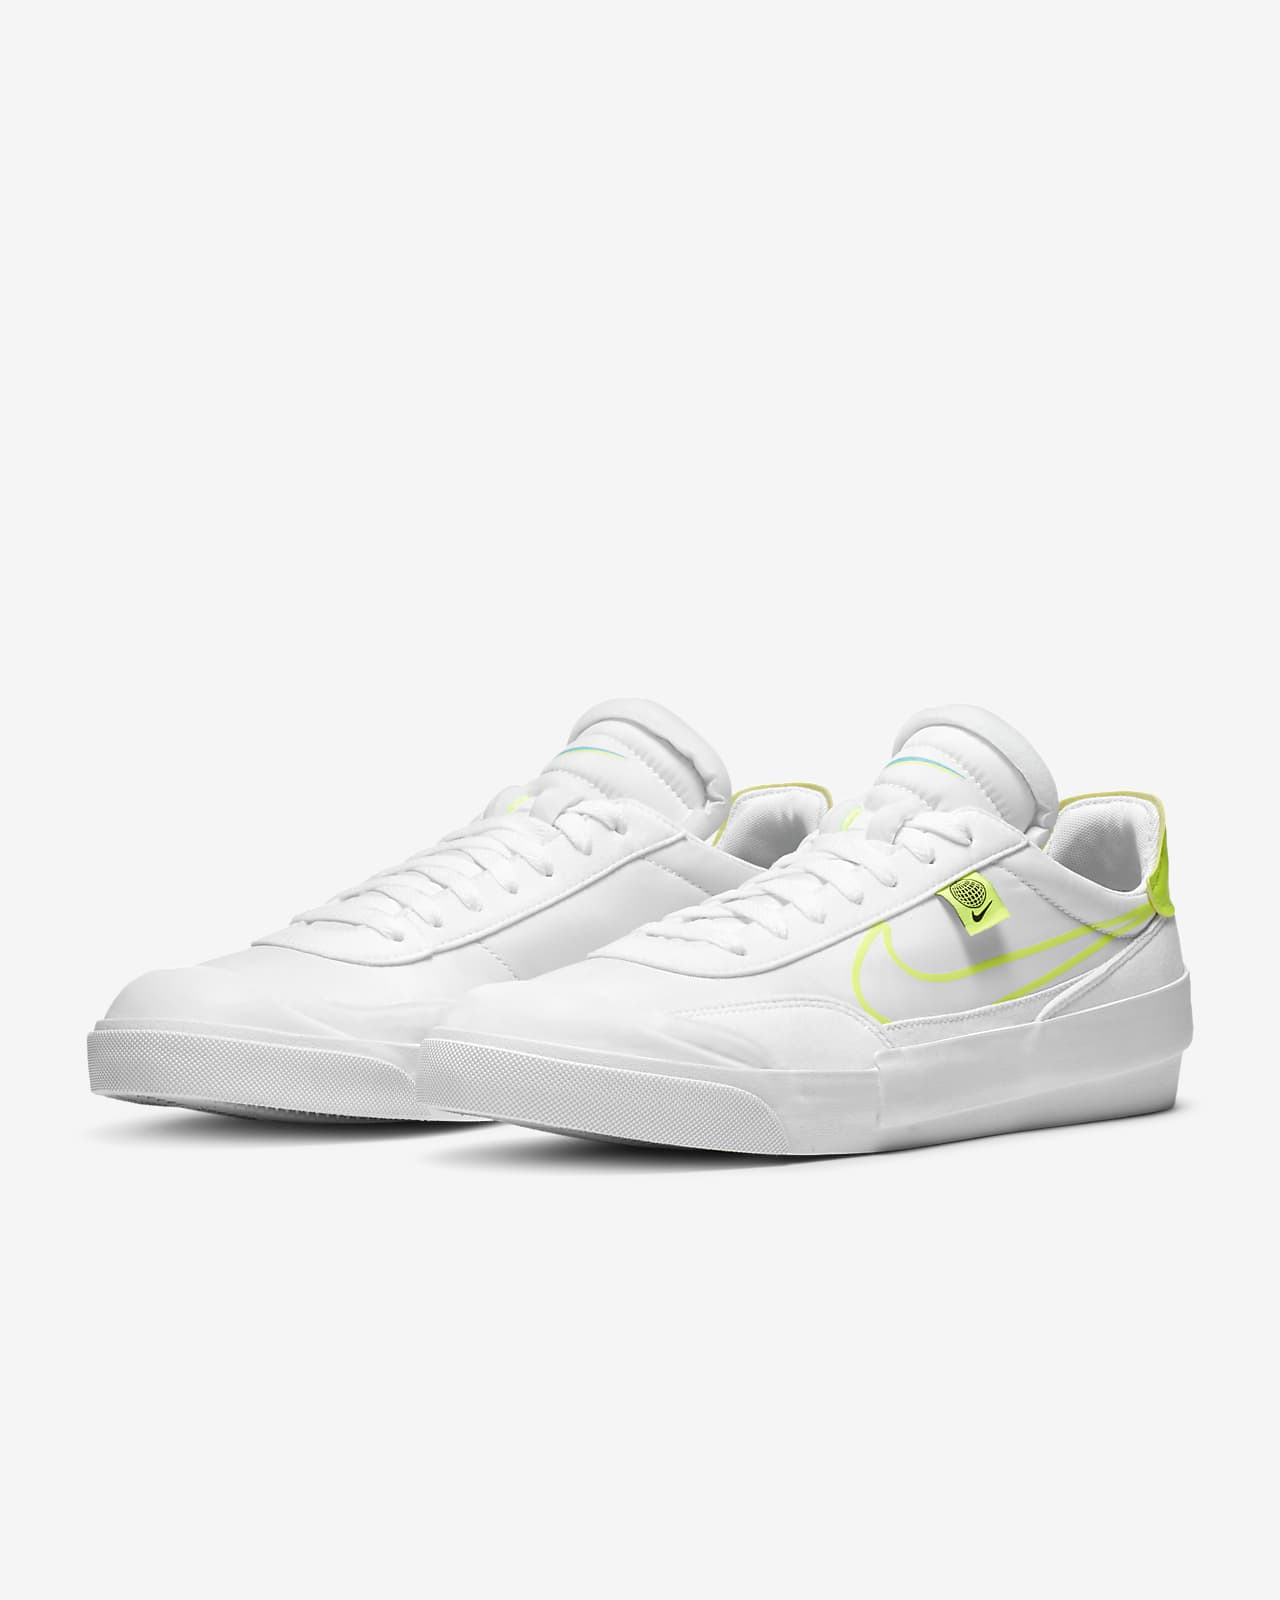 nike hbr shoes